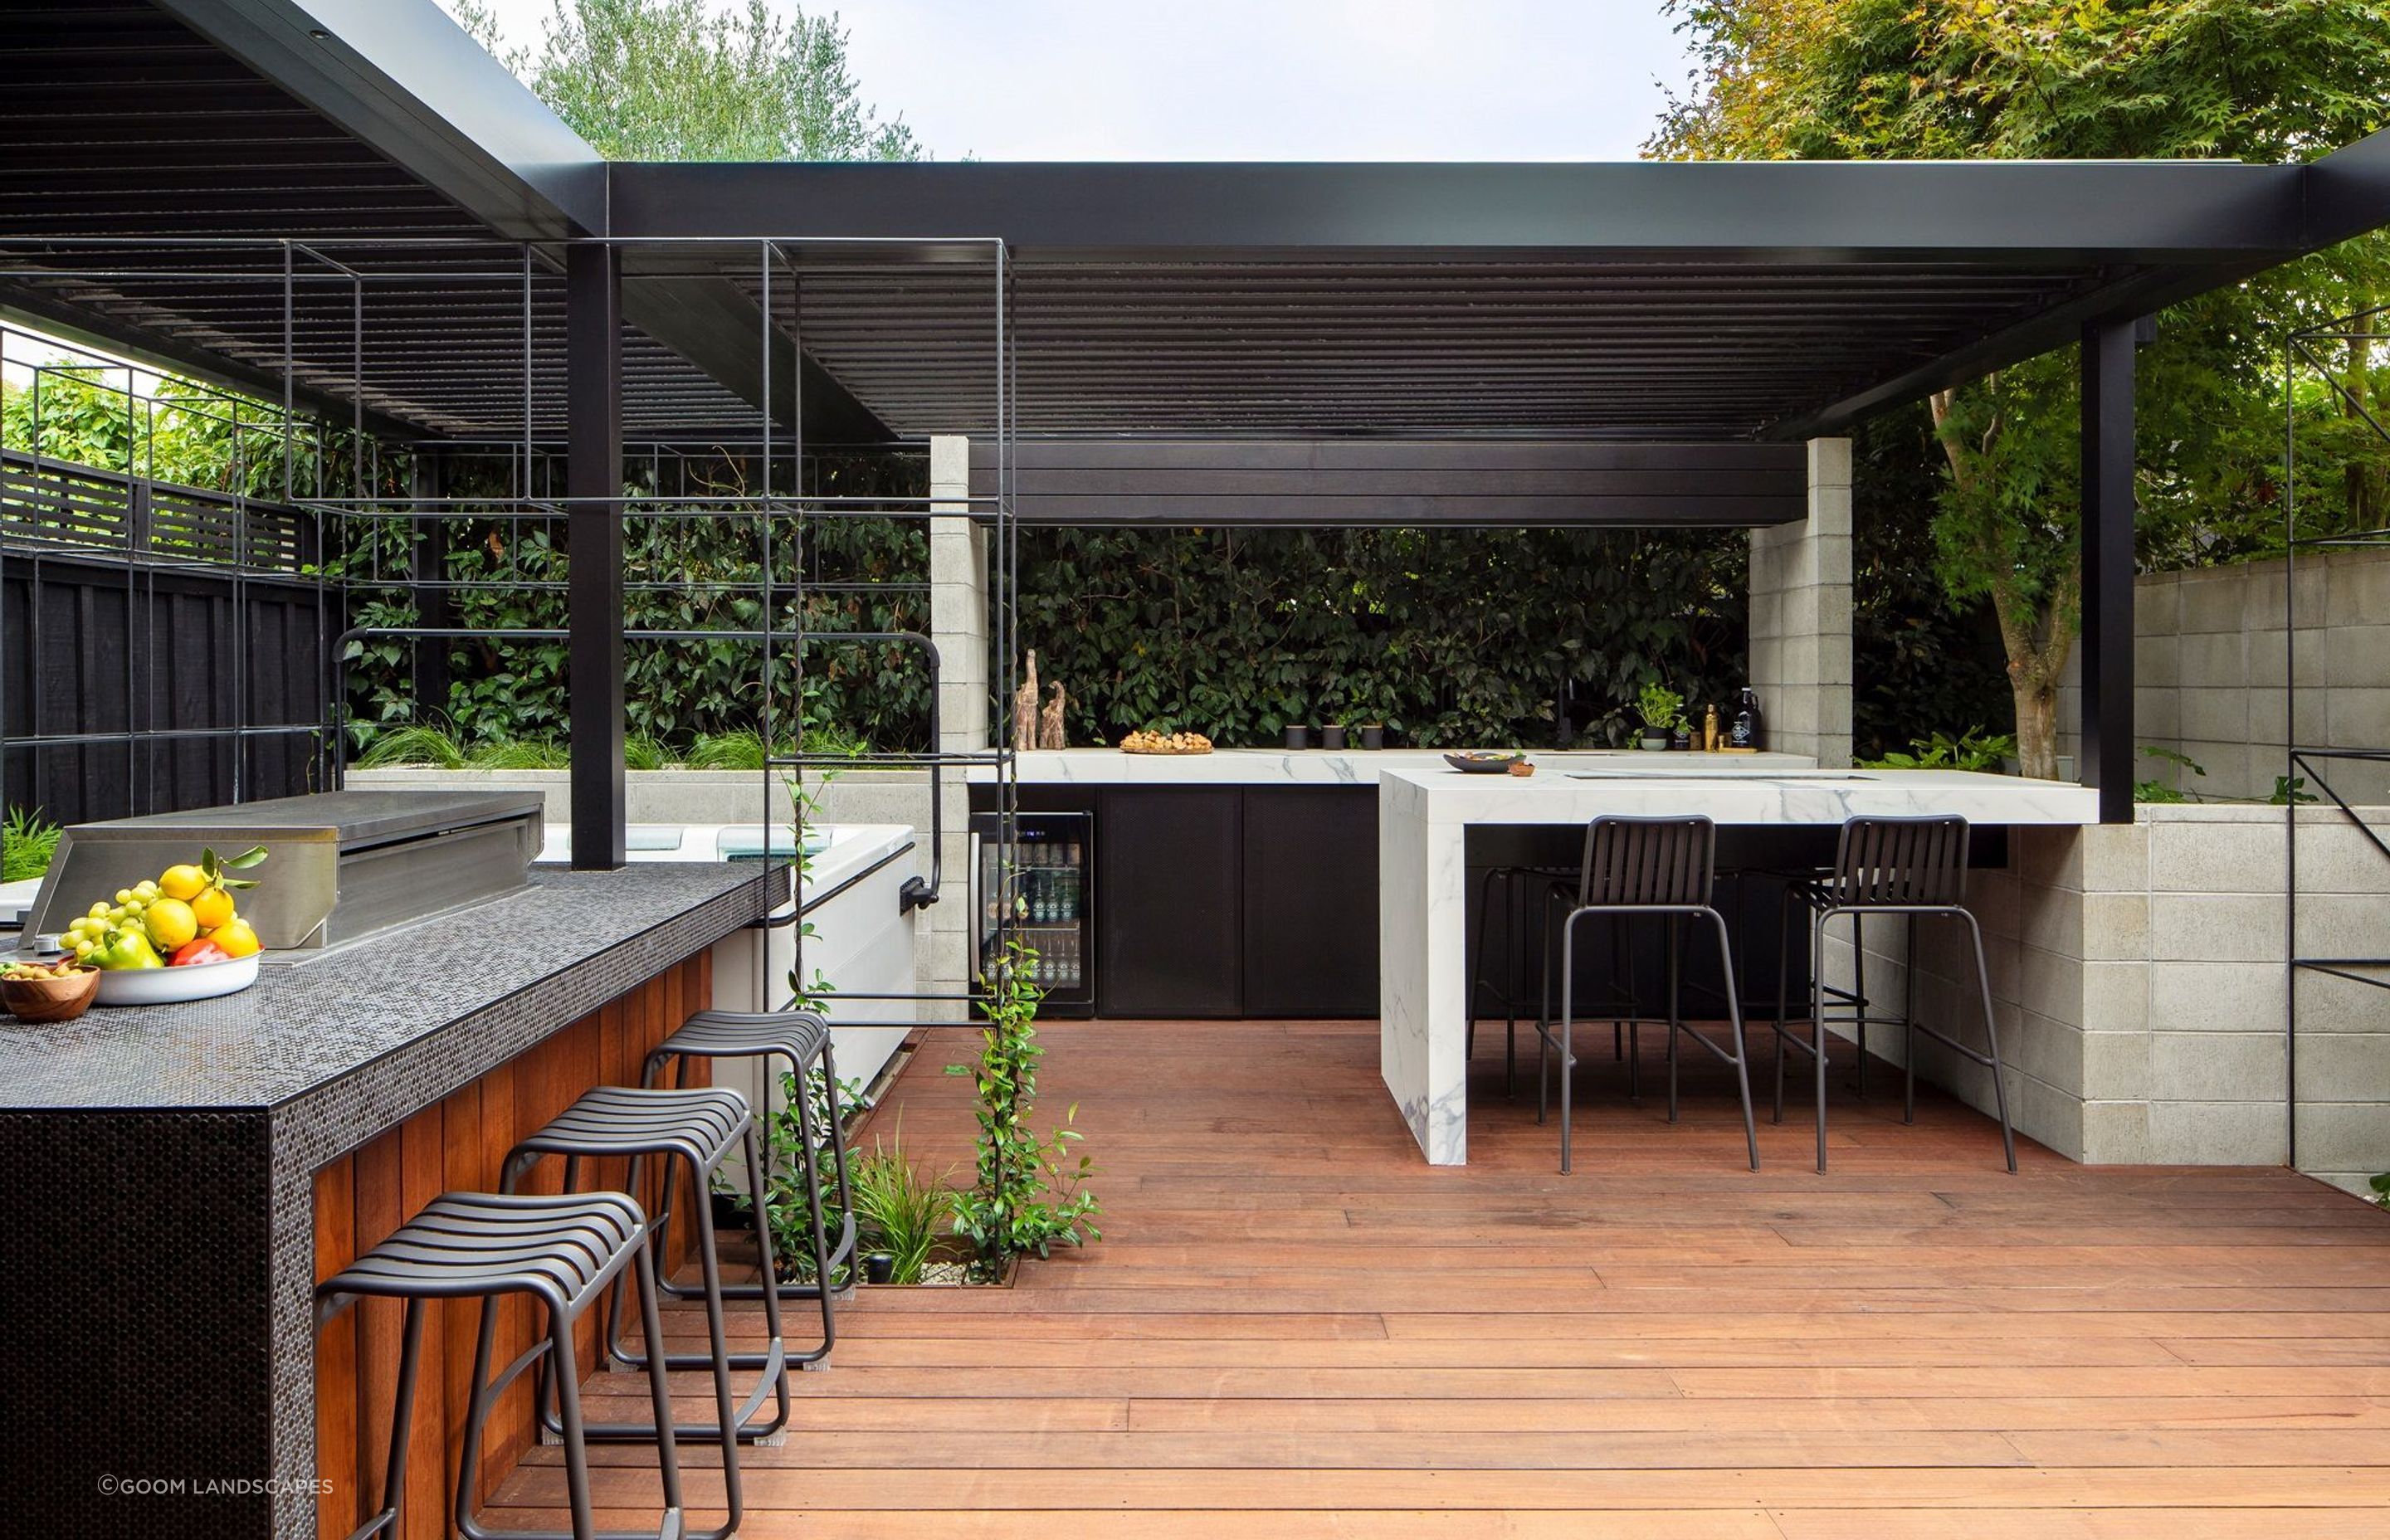 An outdoor kitchen like this can take the outdoor dining experience to another level.